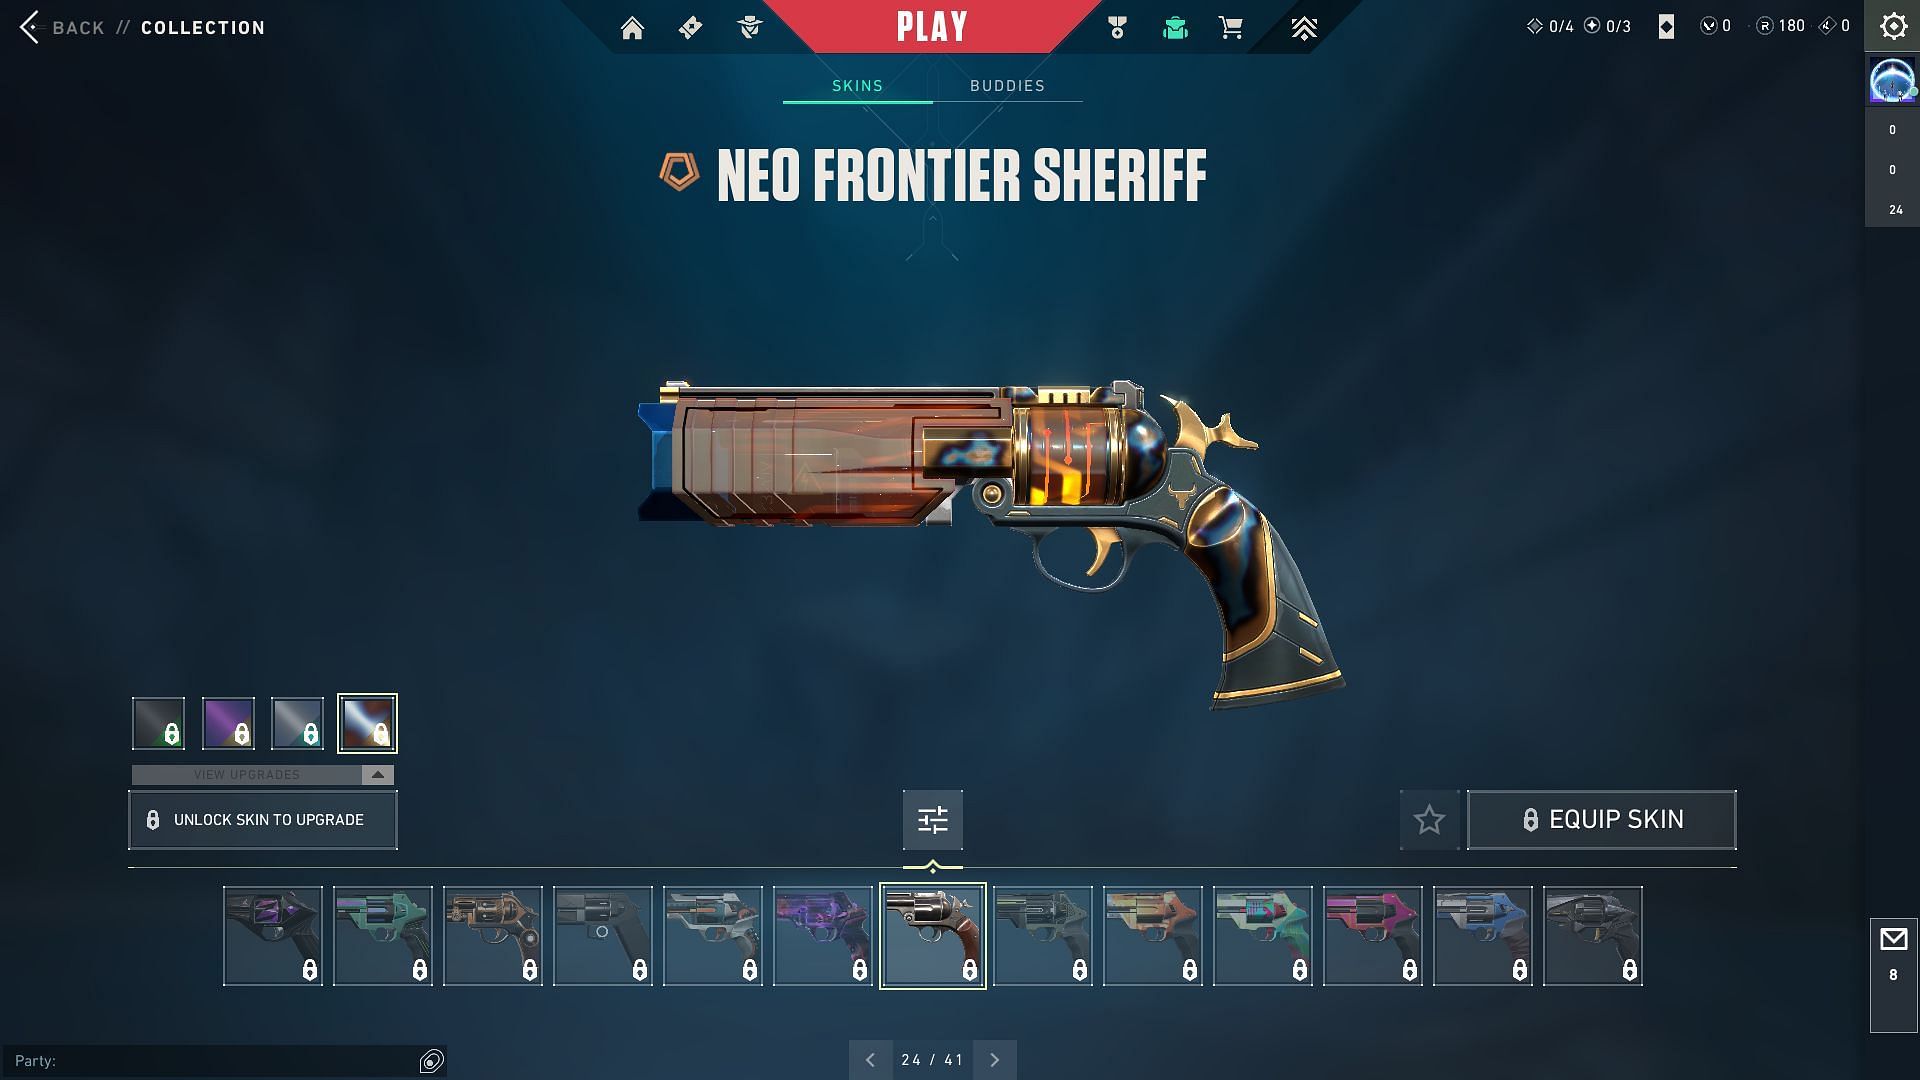 Neo Frontier Sheriff (Image via RIOT Games)